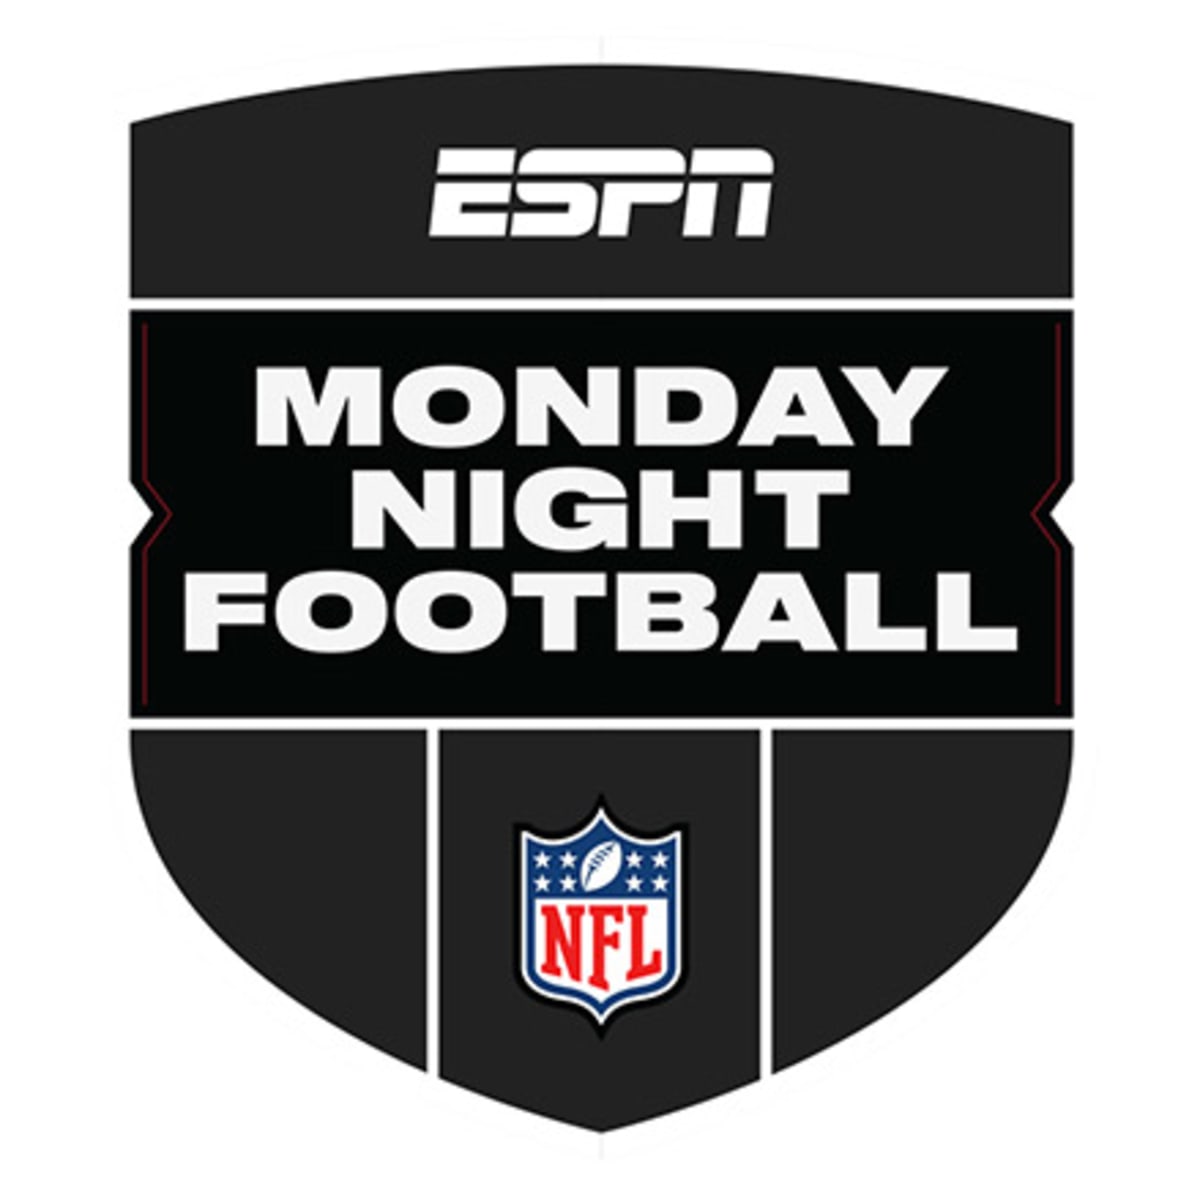 Thursday Night Football Tonight Week 15: Who Plays, TV Channel